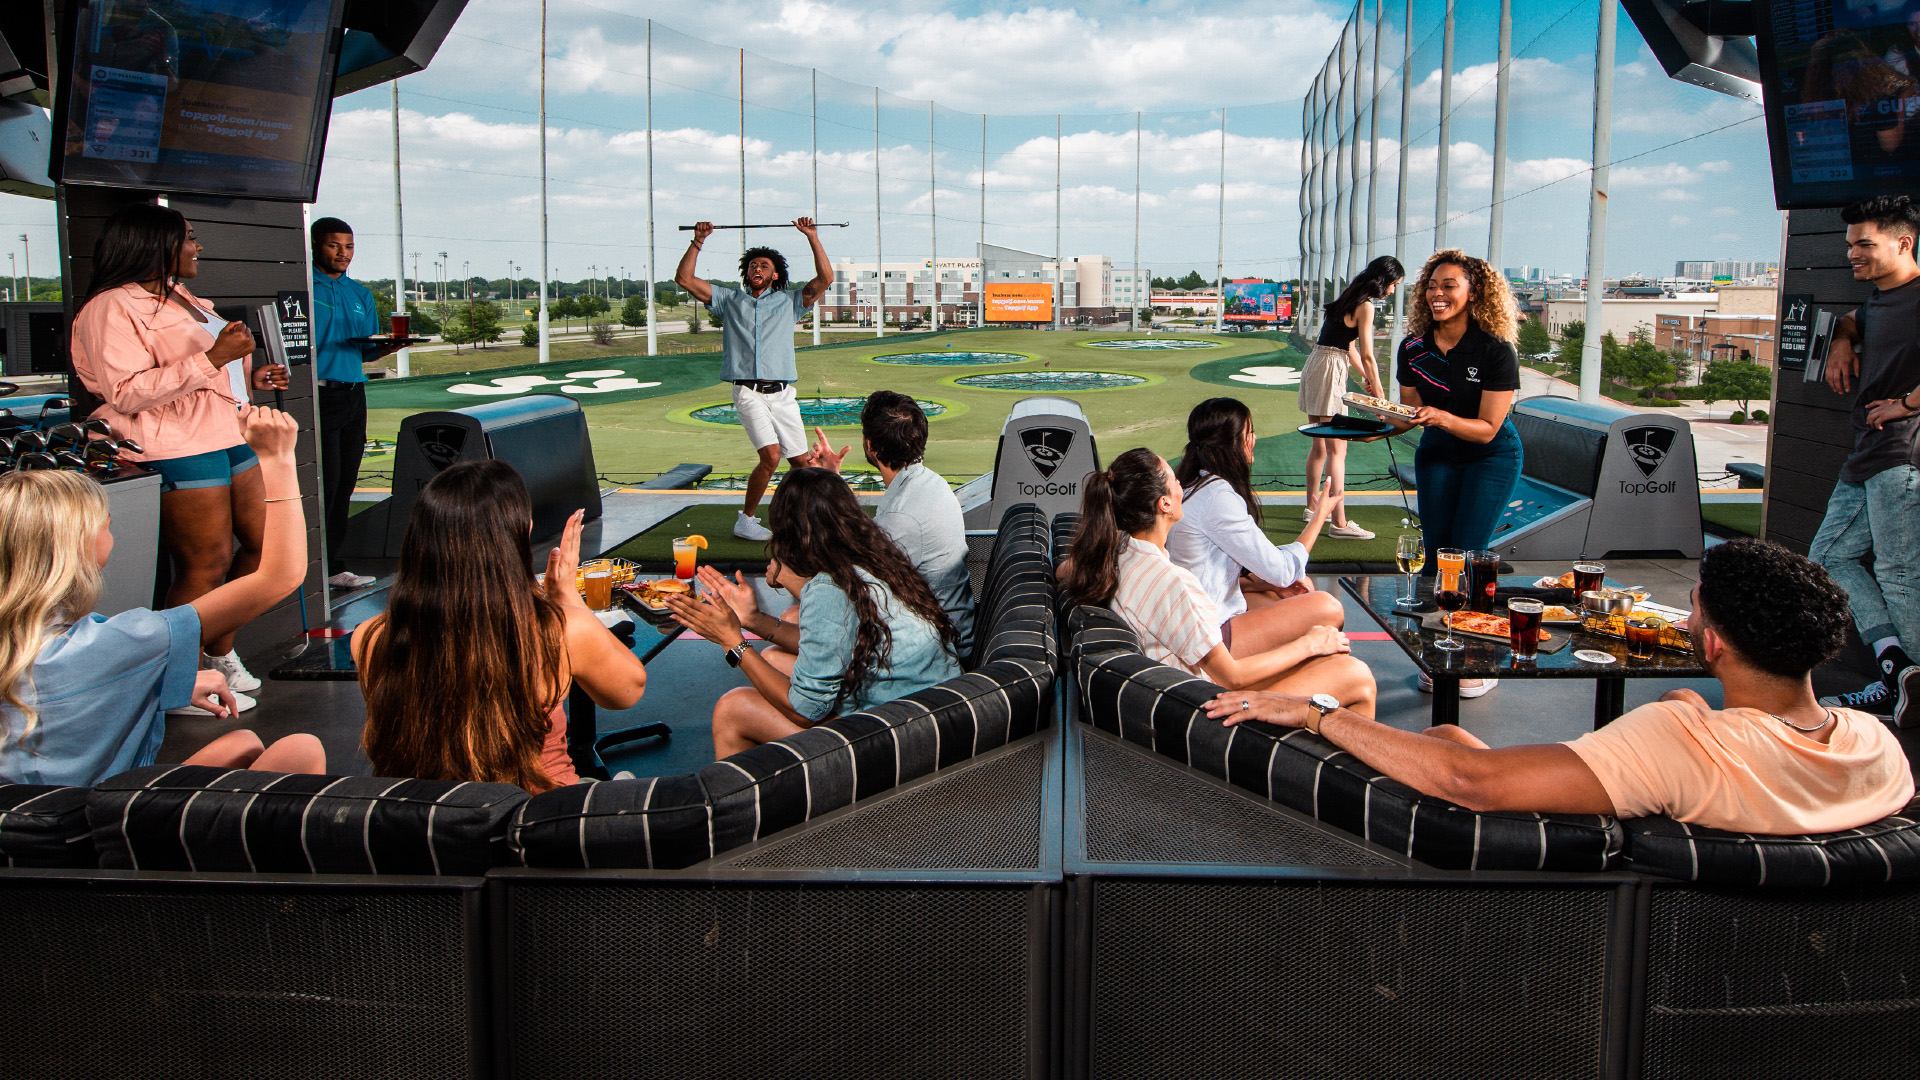 Group Party at Topgolf